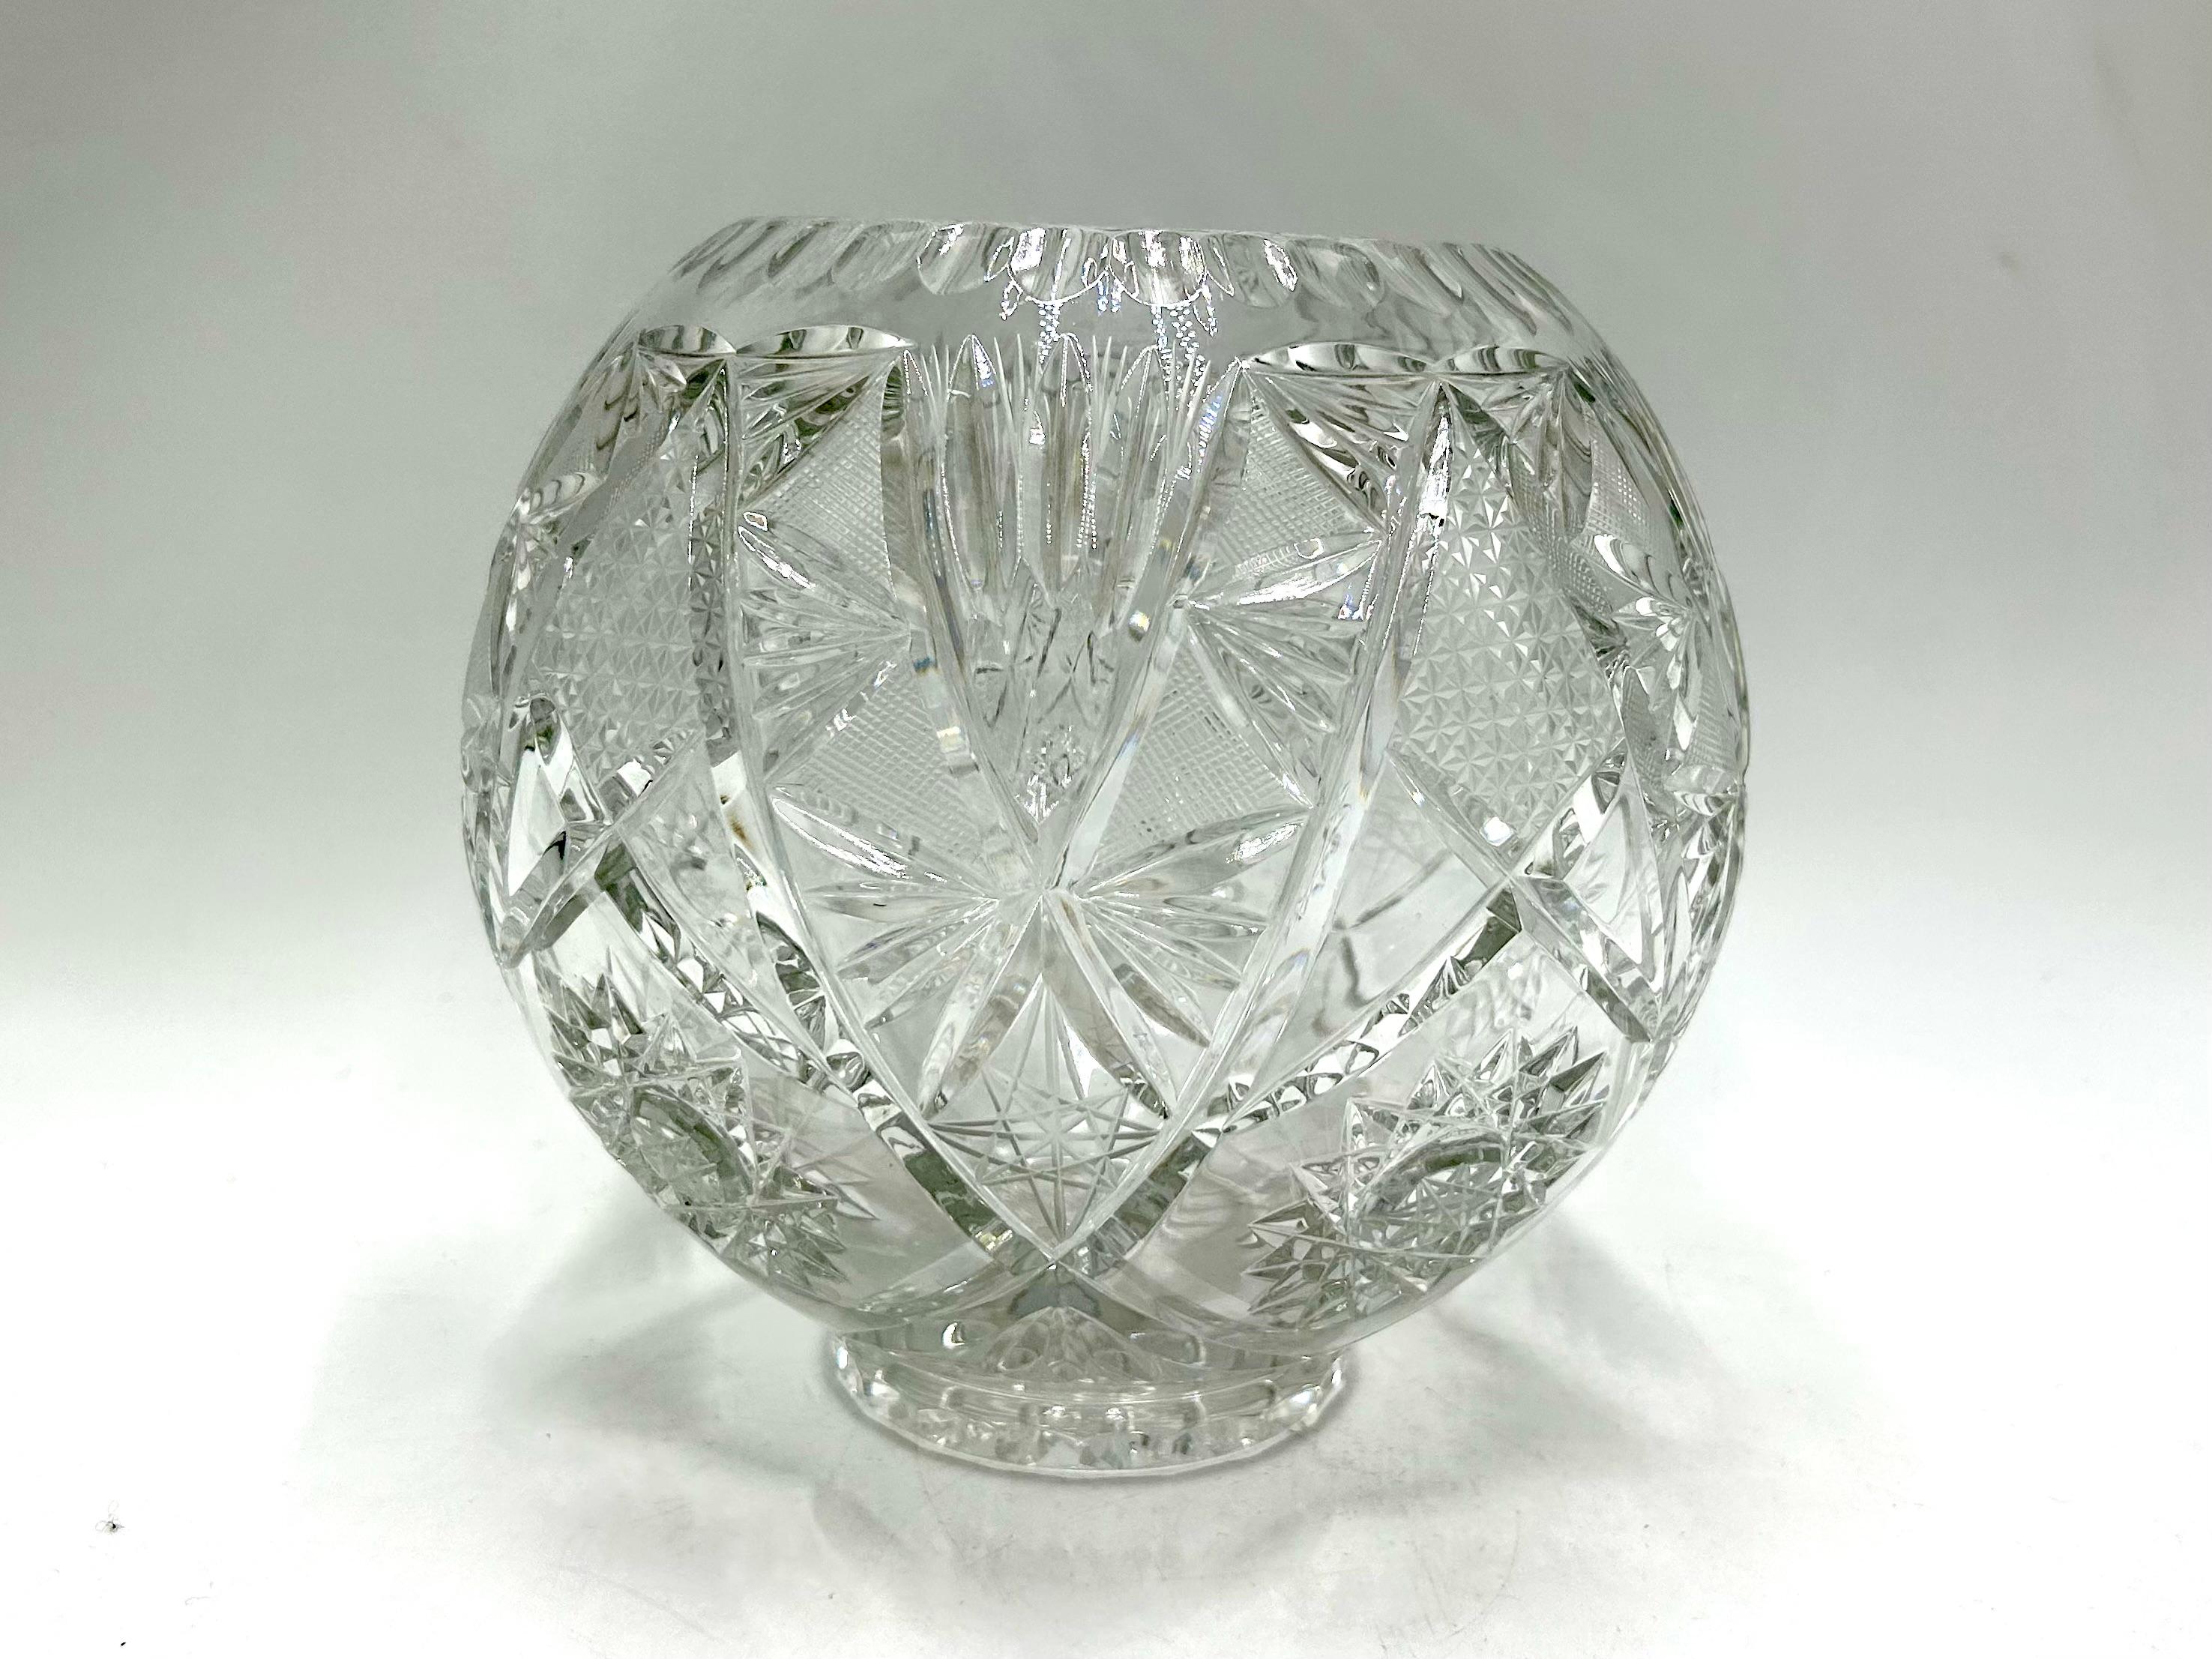 Vase - crystal ball

Made in Poland in the mid-twentieth century

Very good condition, no damage

height: 20cm

diameter: 17cm.